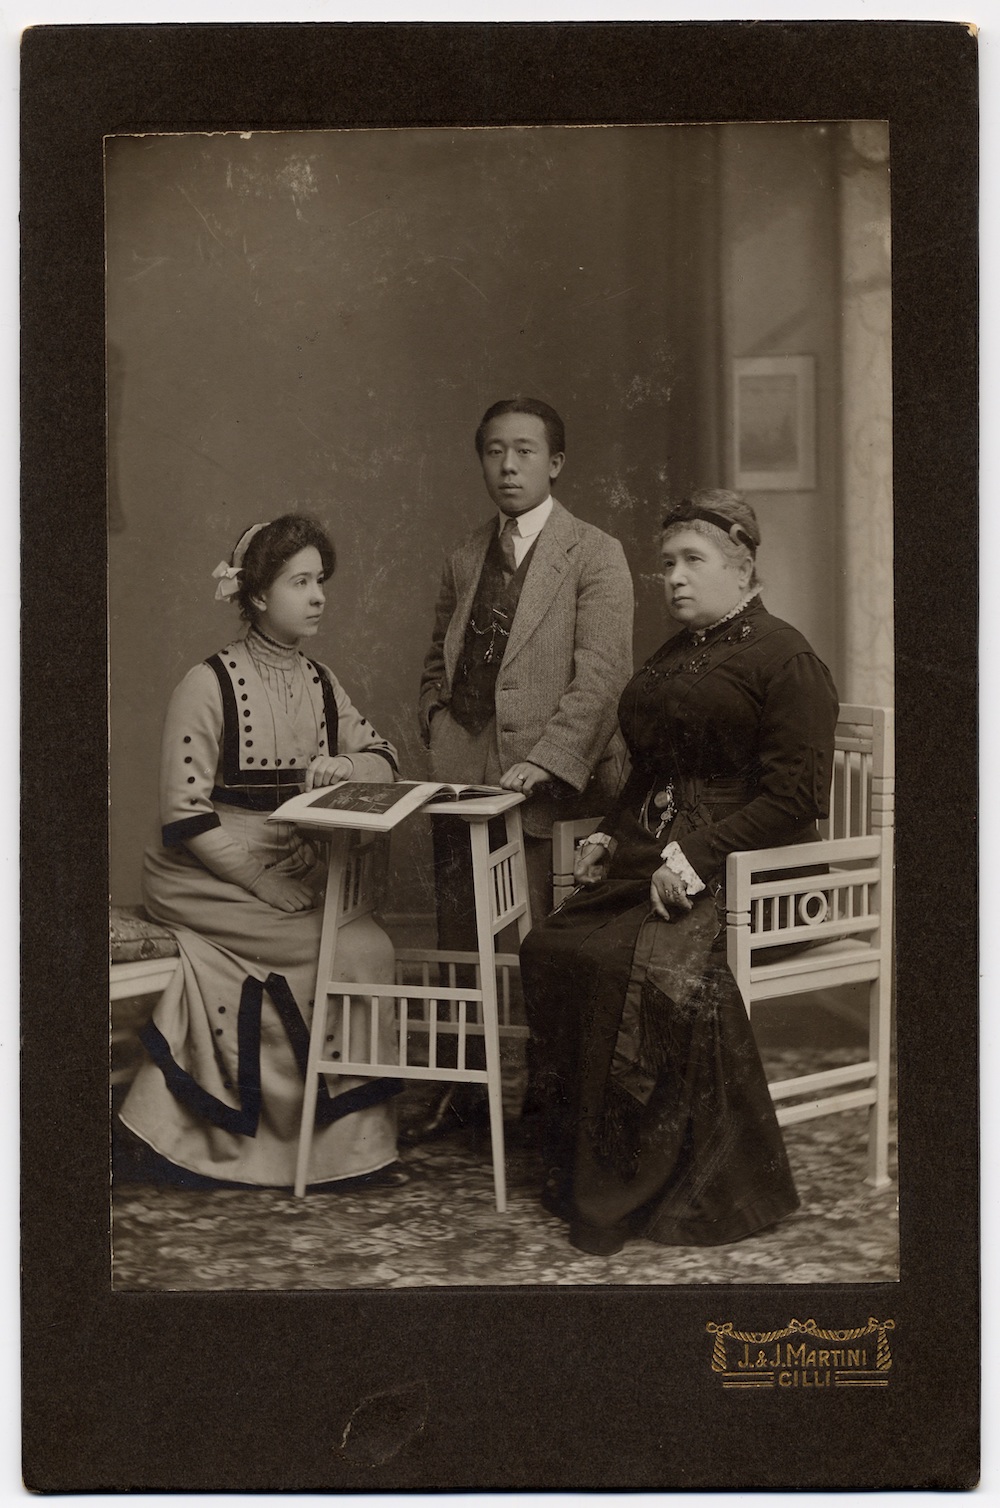 Alma Karlin with her fiancé, Xu Yong Lun, and her mother